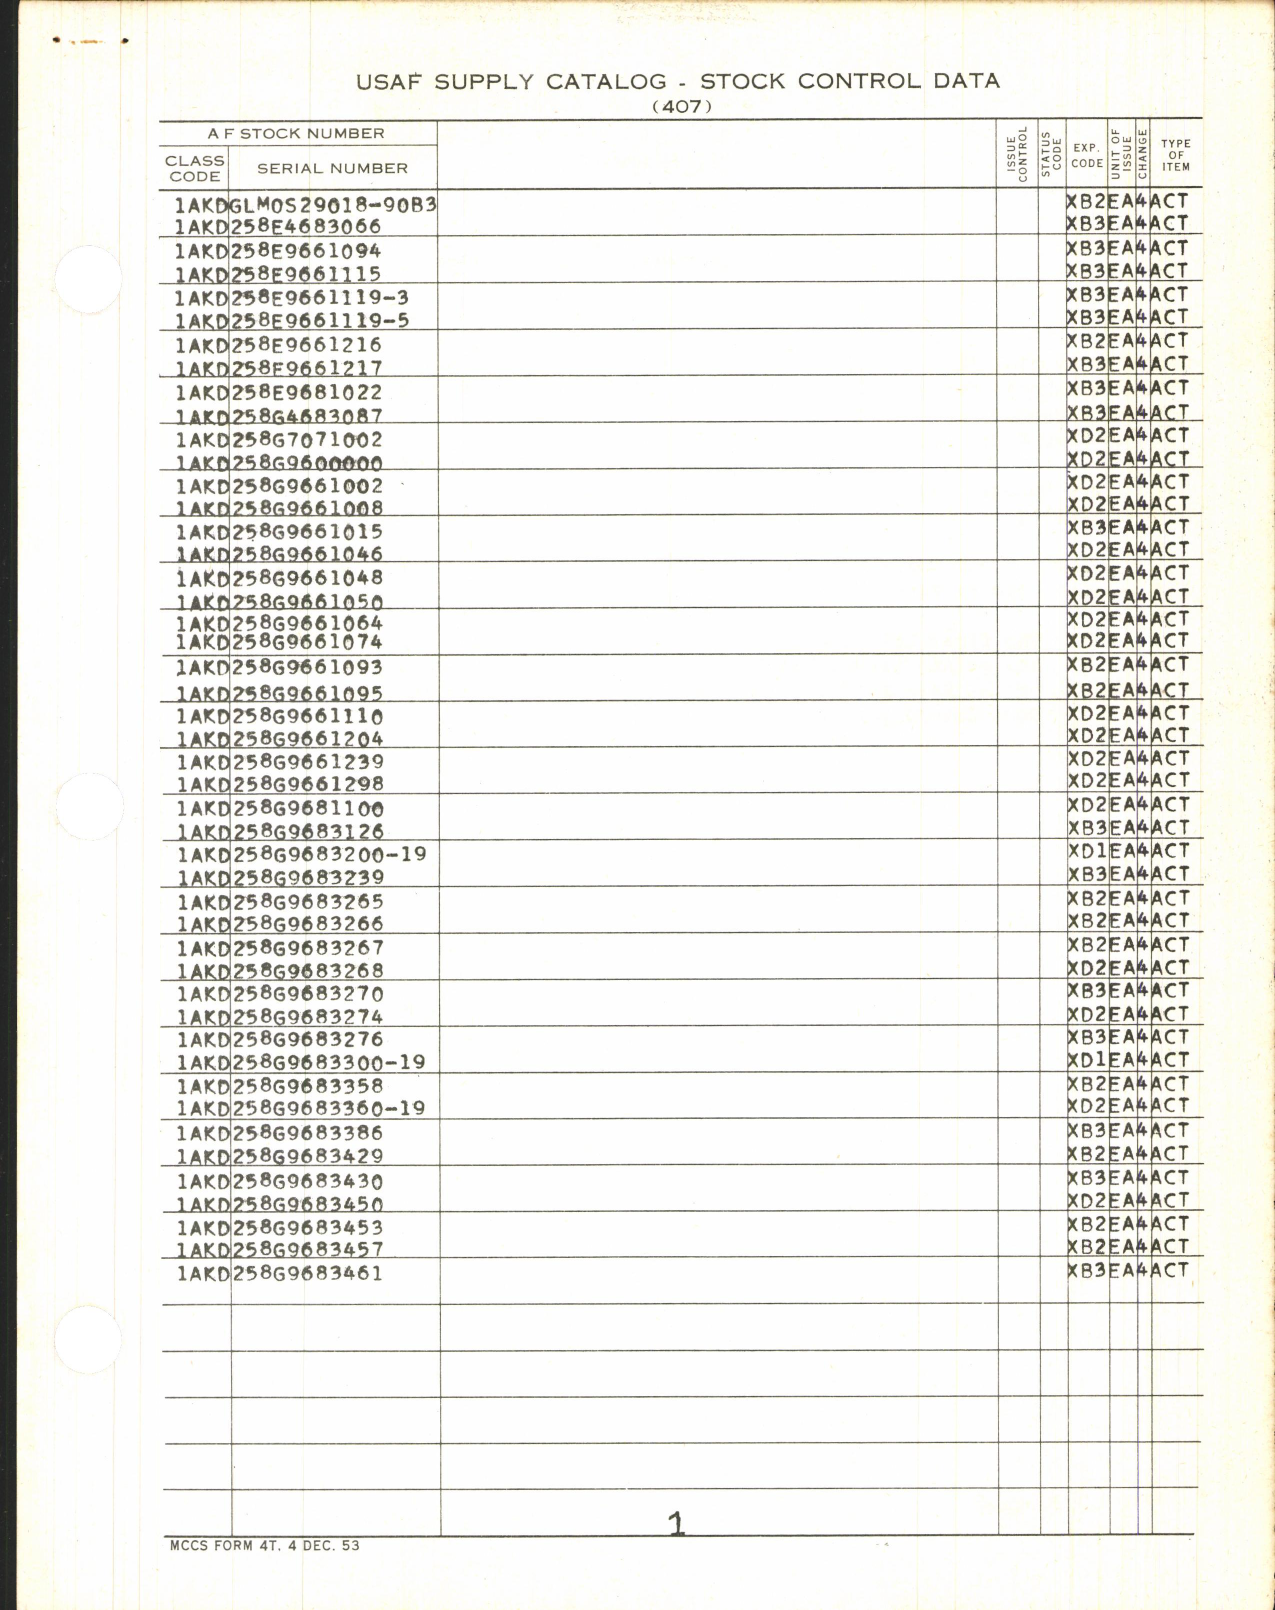 Sample page 3 from AirCorps Library document: Supply Catalog Parts for Martin B-61 Aircraft